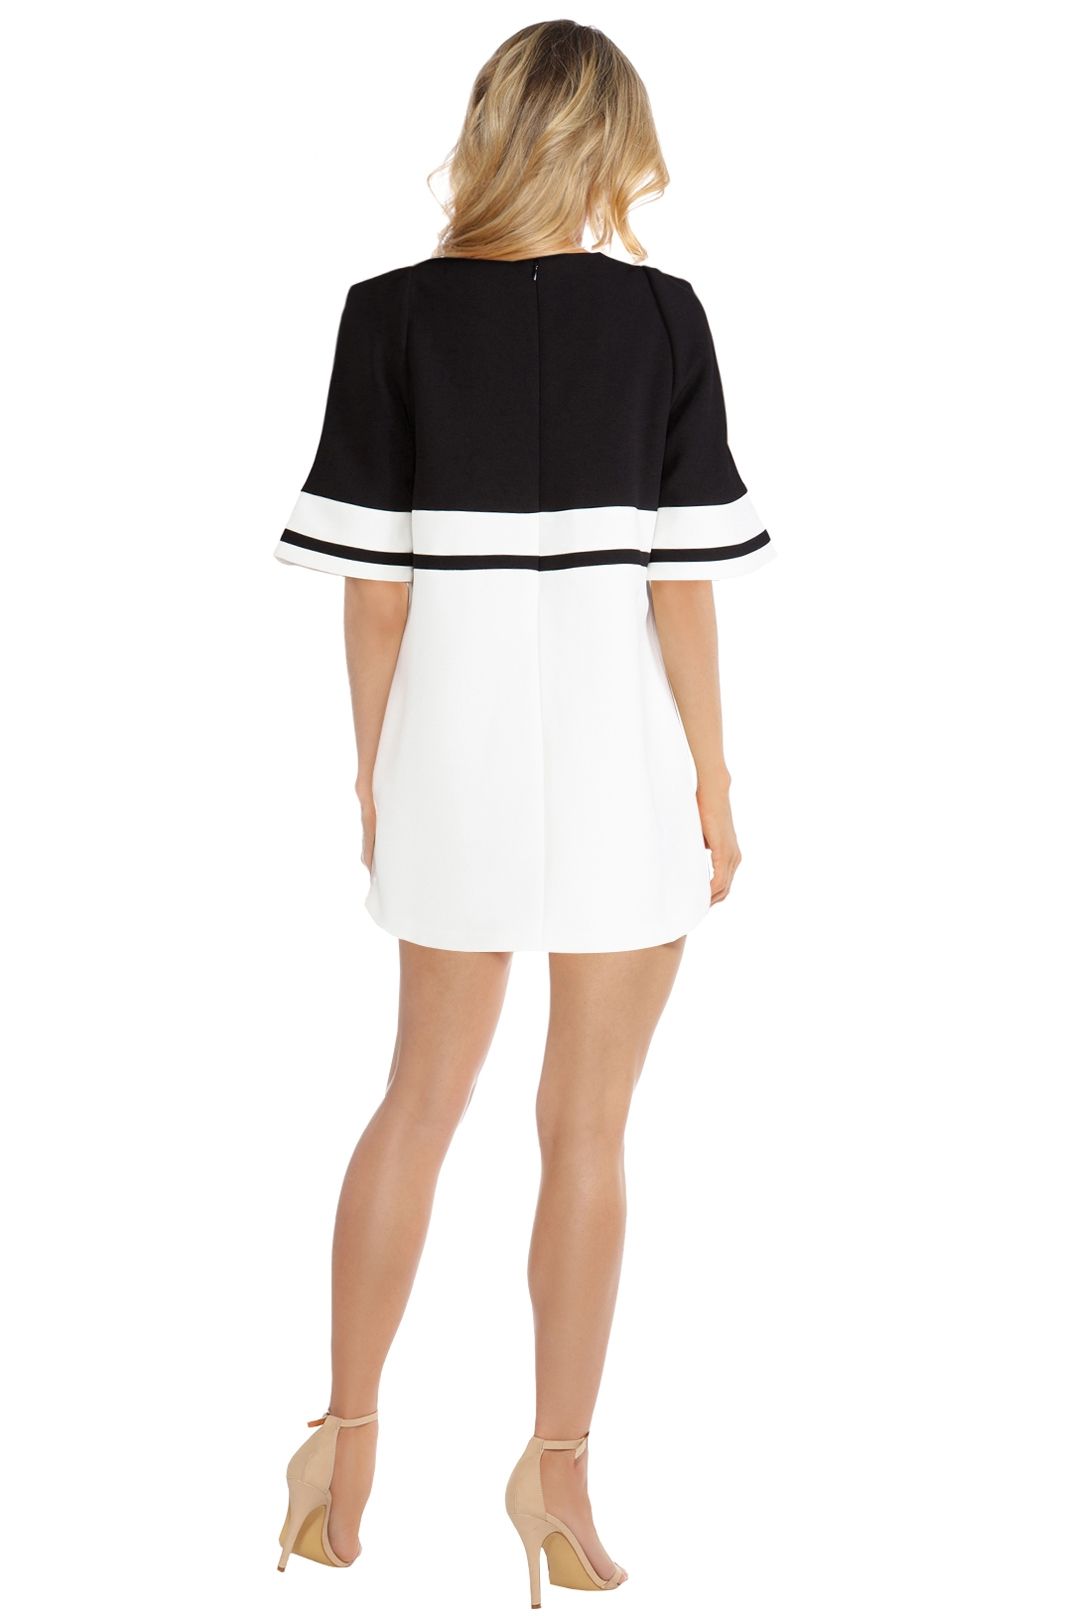 C/MEO Collective - We Are Young Dress - Black White - Back